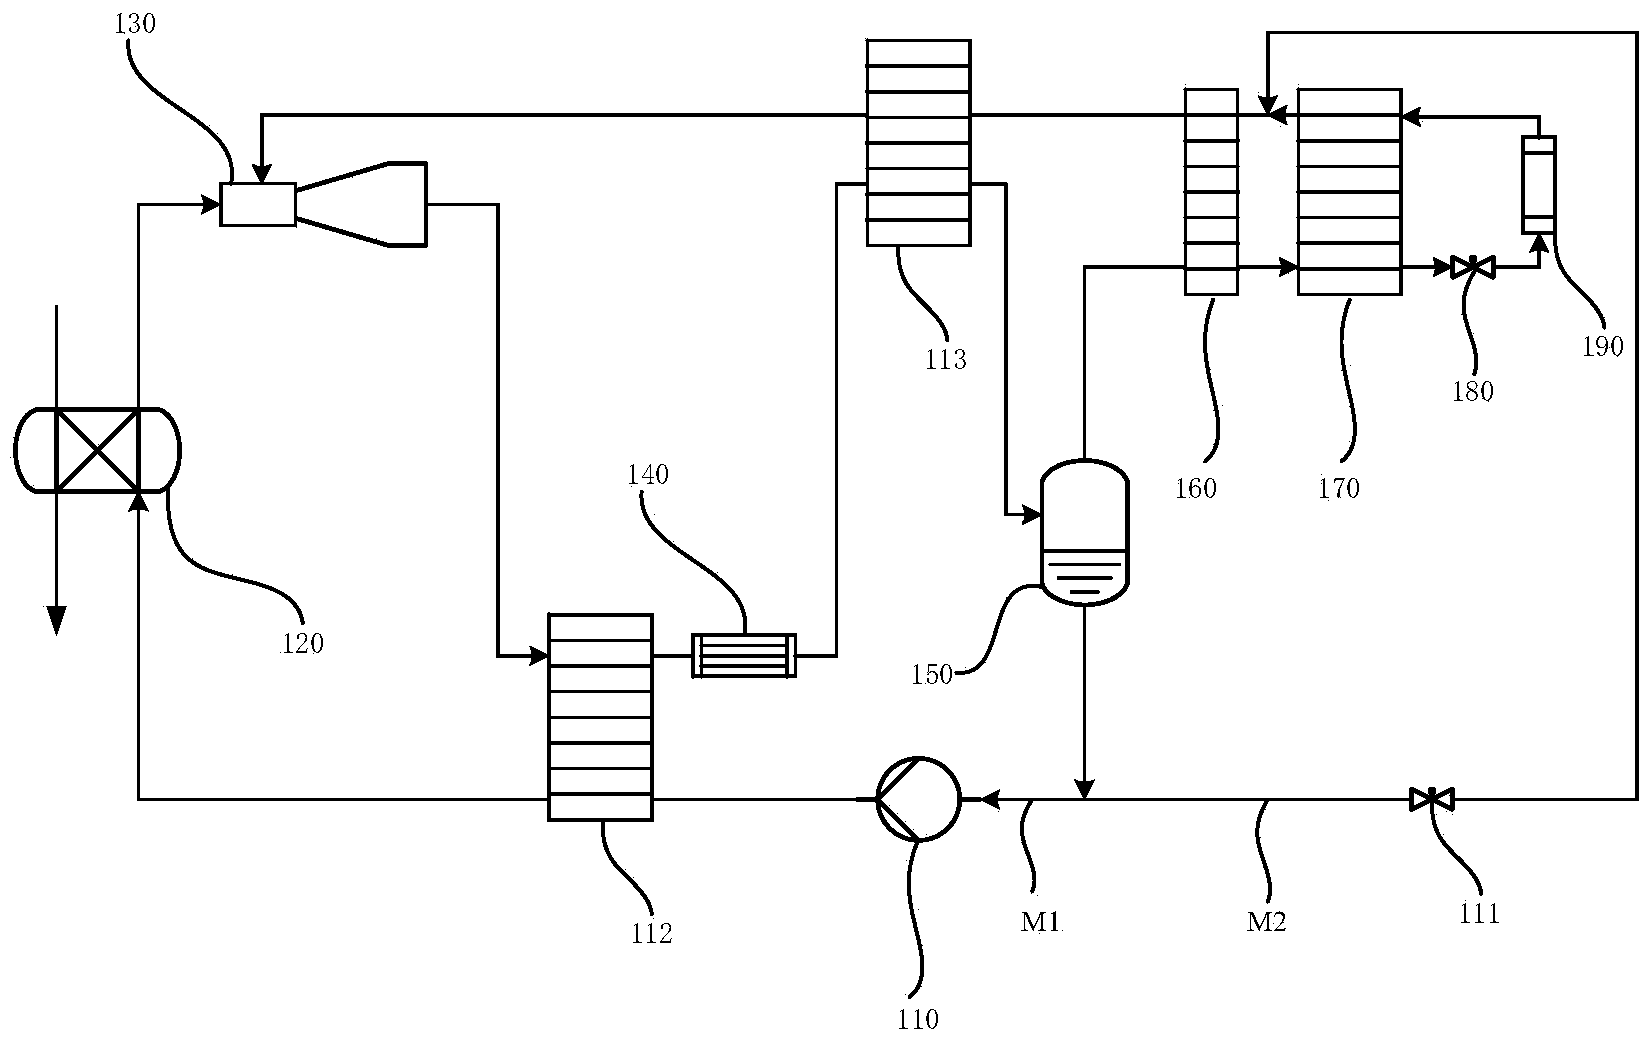 Mixed working medium low-temperature refrigerating cycle system driving ejector through waste heat